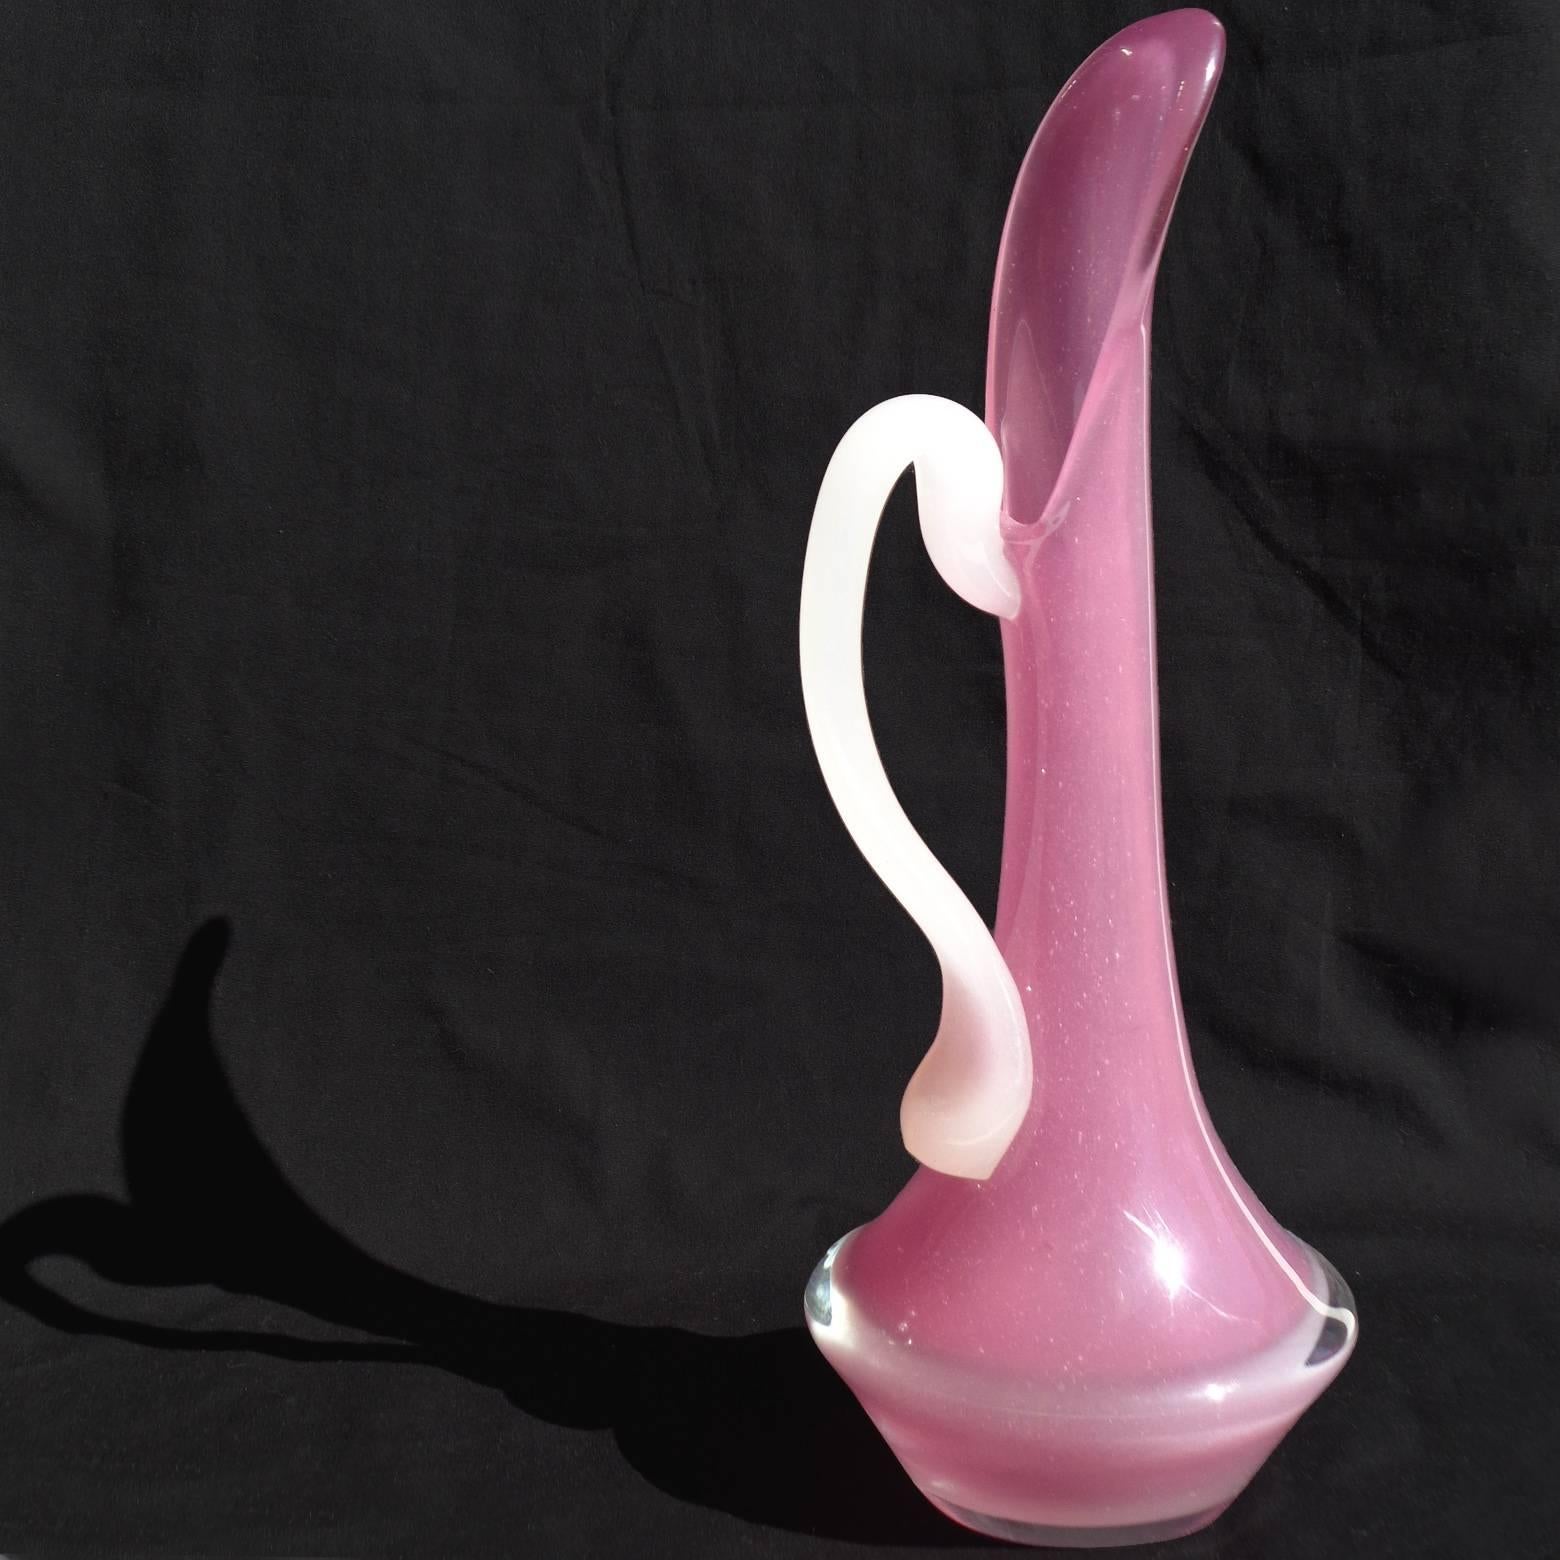 Beautiful Murano hand blown opal pink and white handle Italian art glass pitcher / ewer. Created in the manner of Archimede Seguso. Measures 11 inches tall.
